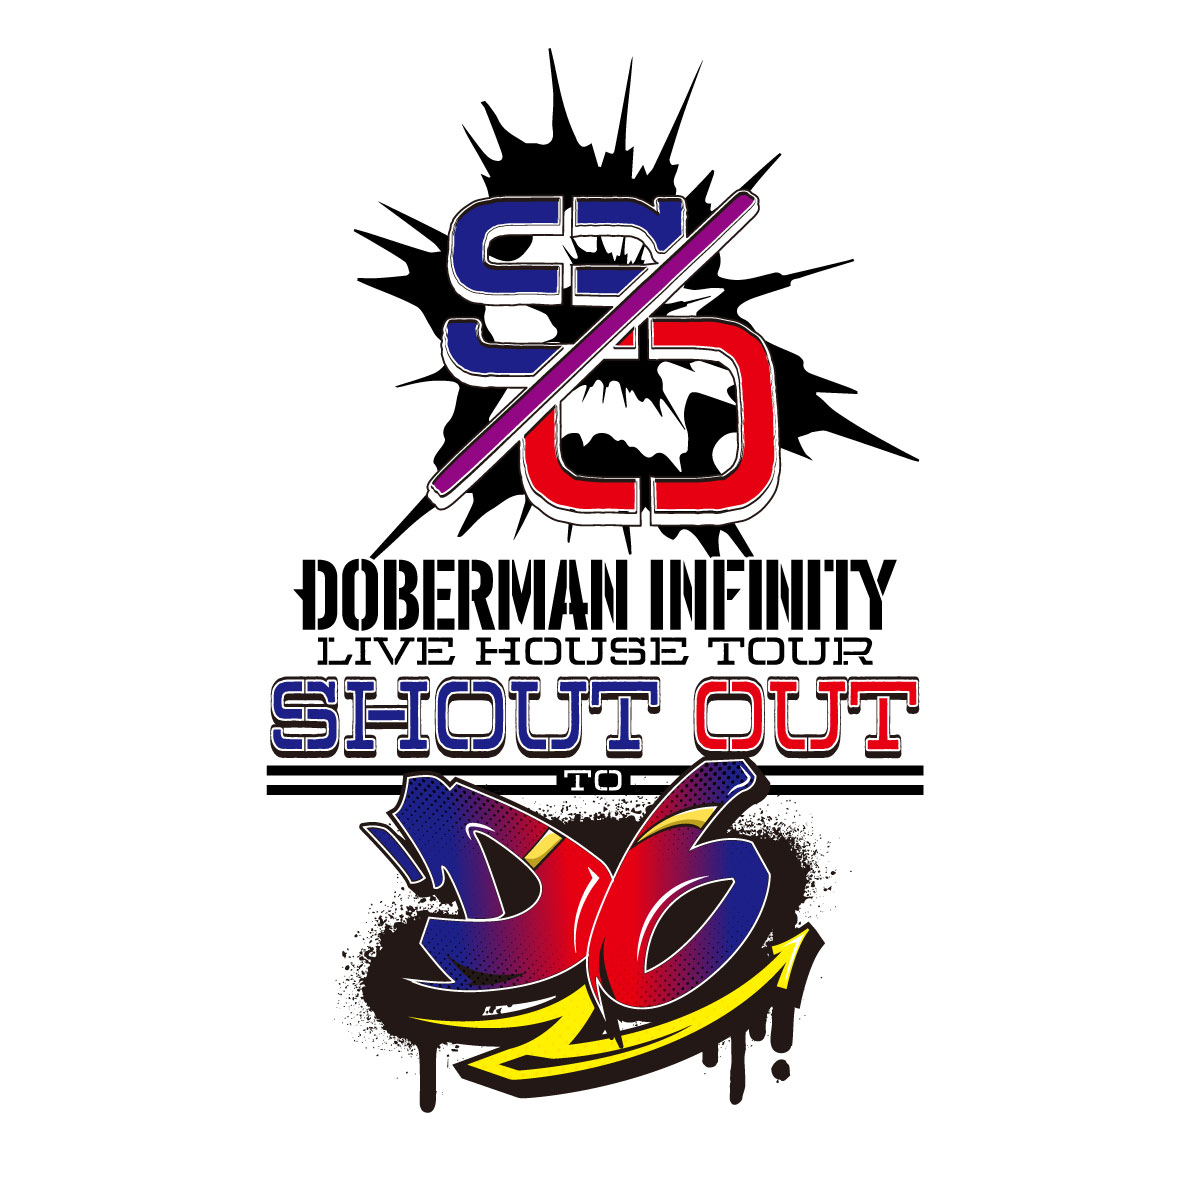 DOBERMAN INFINITY LIVE HOUSE TOUR 2023 "SHOUT OUT to D6"の開催が決定しました！